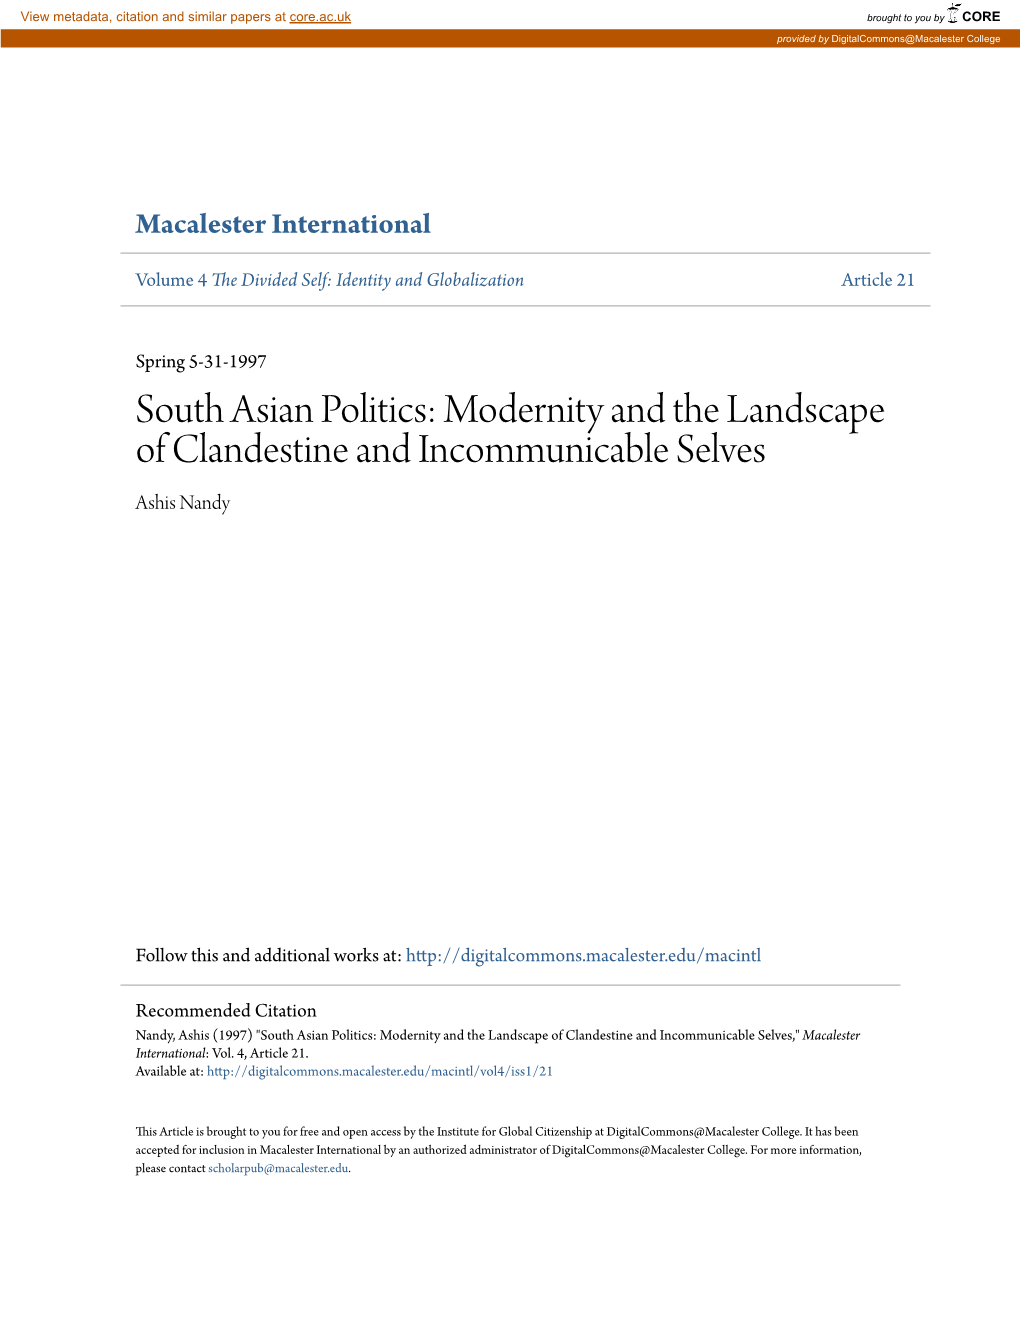 South Asian Politics: Modernity and the Landscape of Clandestine and Incommunicable Selves Ashis Nandy